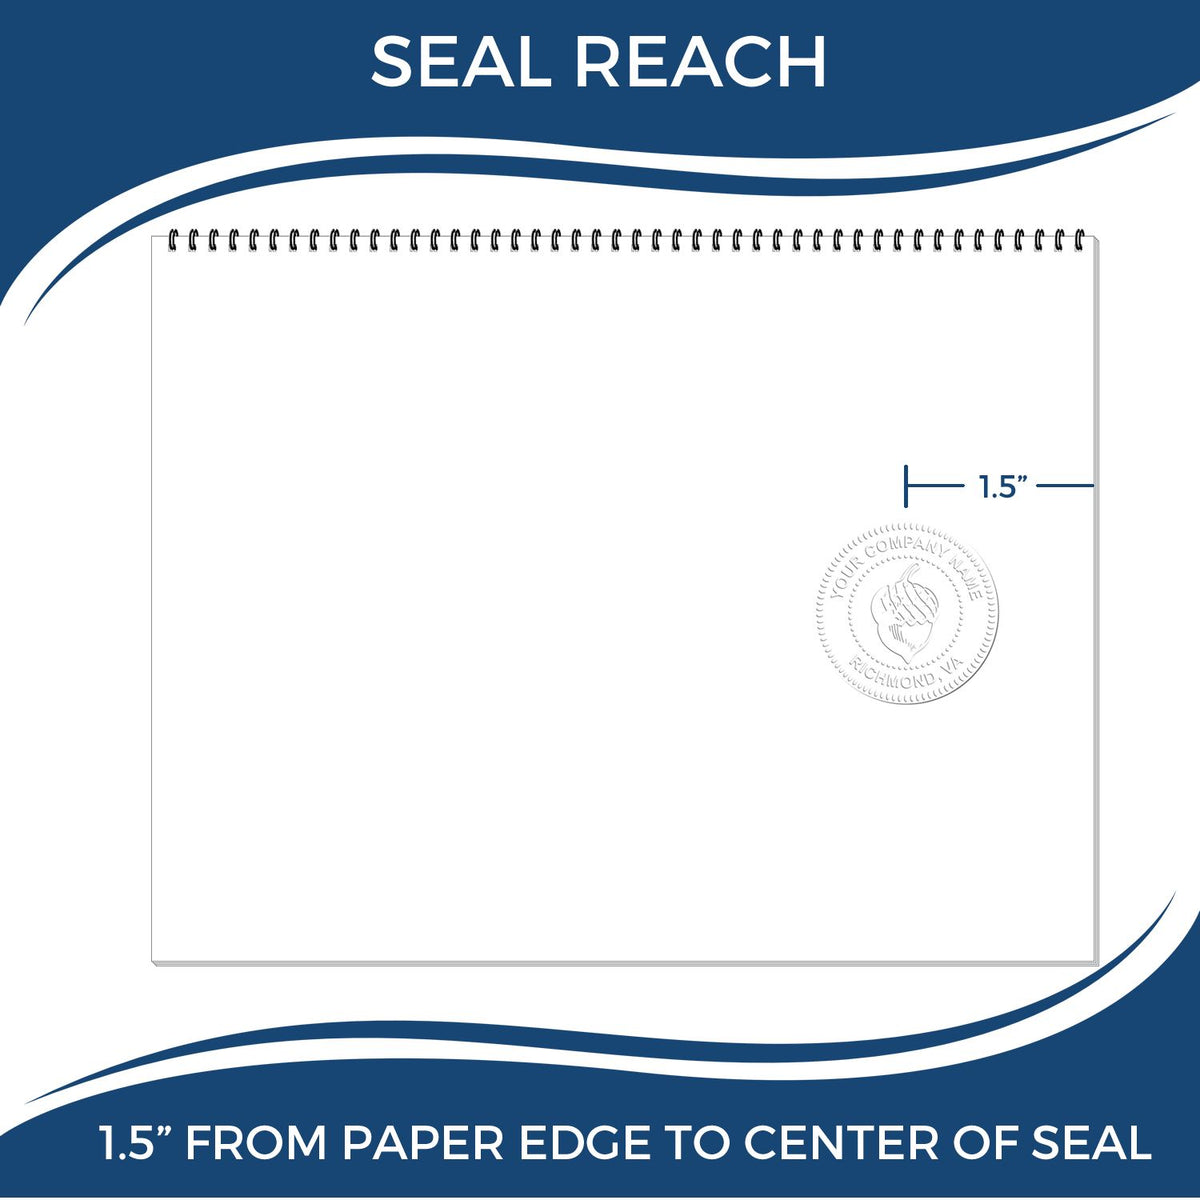 An infographic showing the seal reach which is represented by a ruler and a miniature seal image of the Florida Engineer Desk Seal